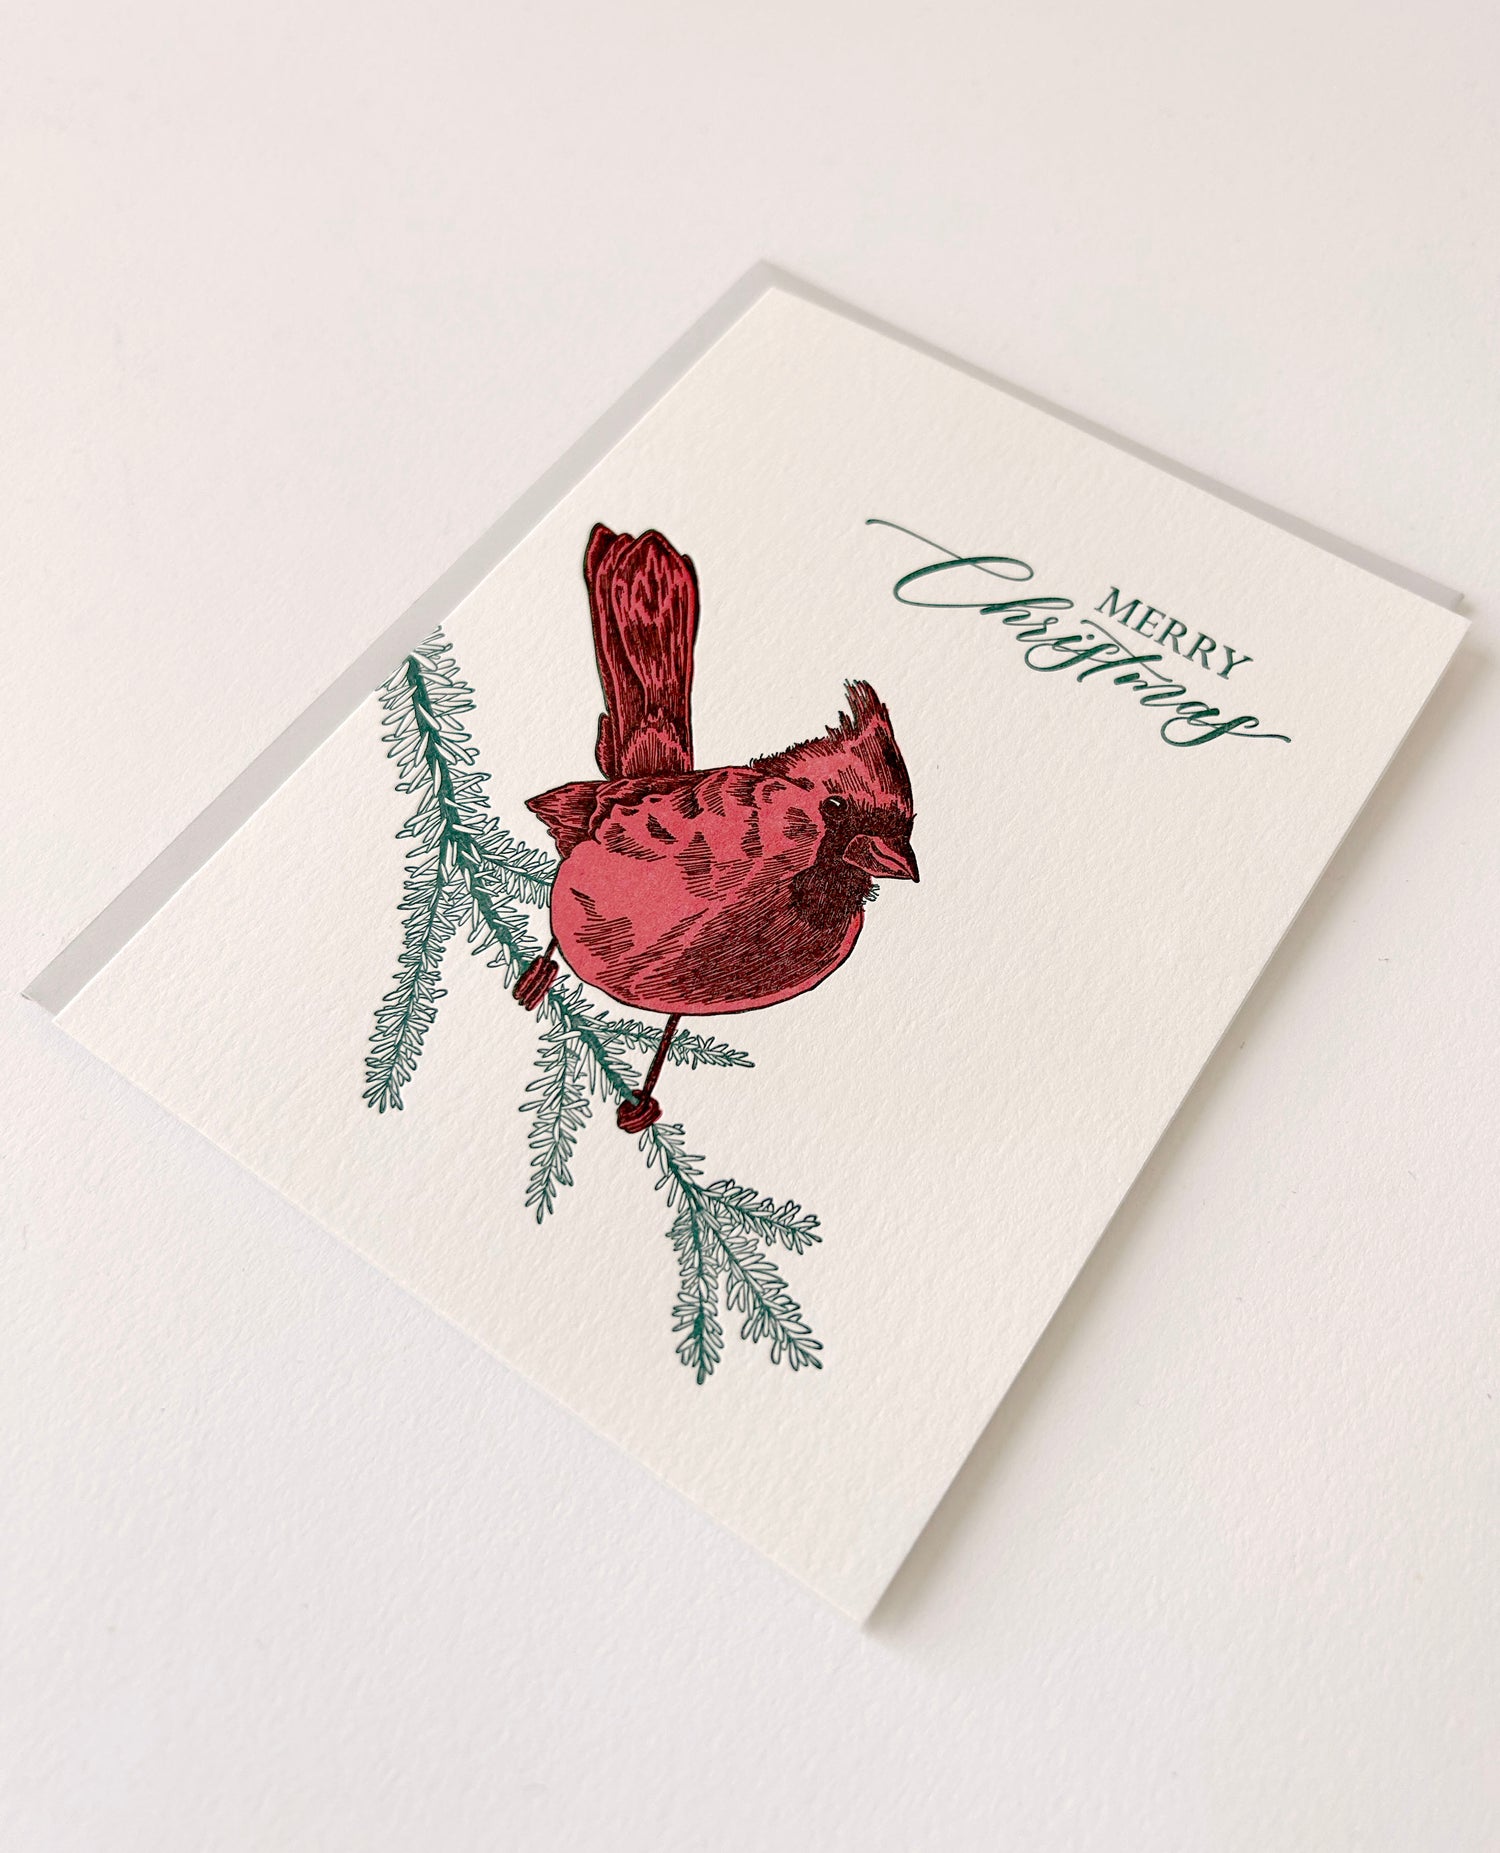 Letterpress holiday card with cardinal that says "Merry Christmas" by Rust Belt Love